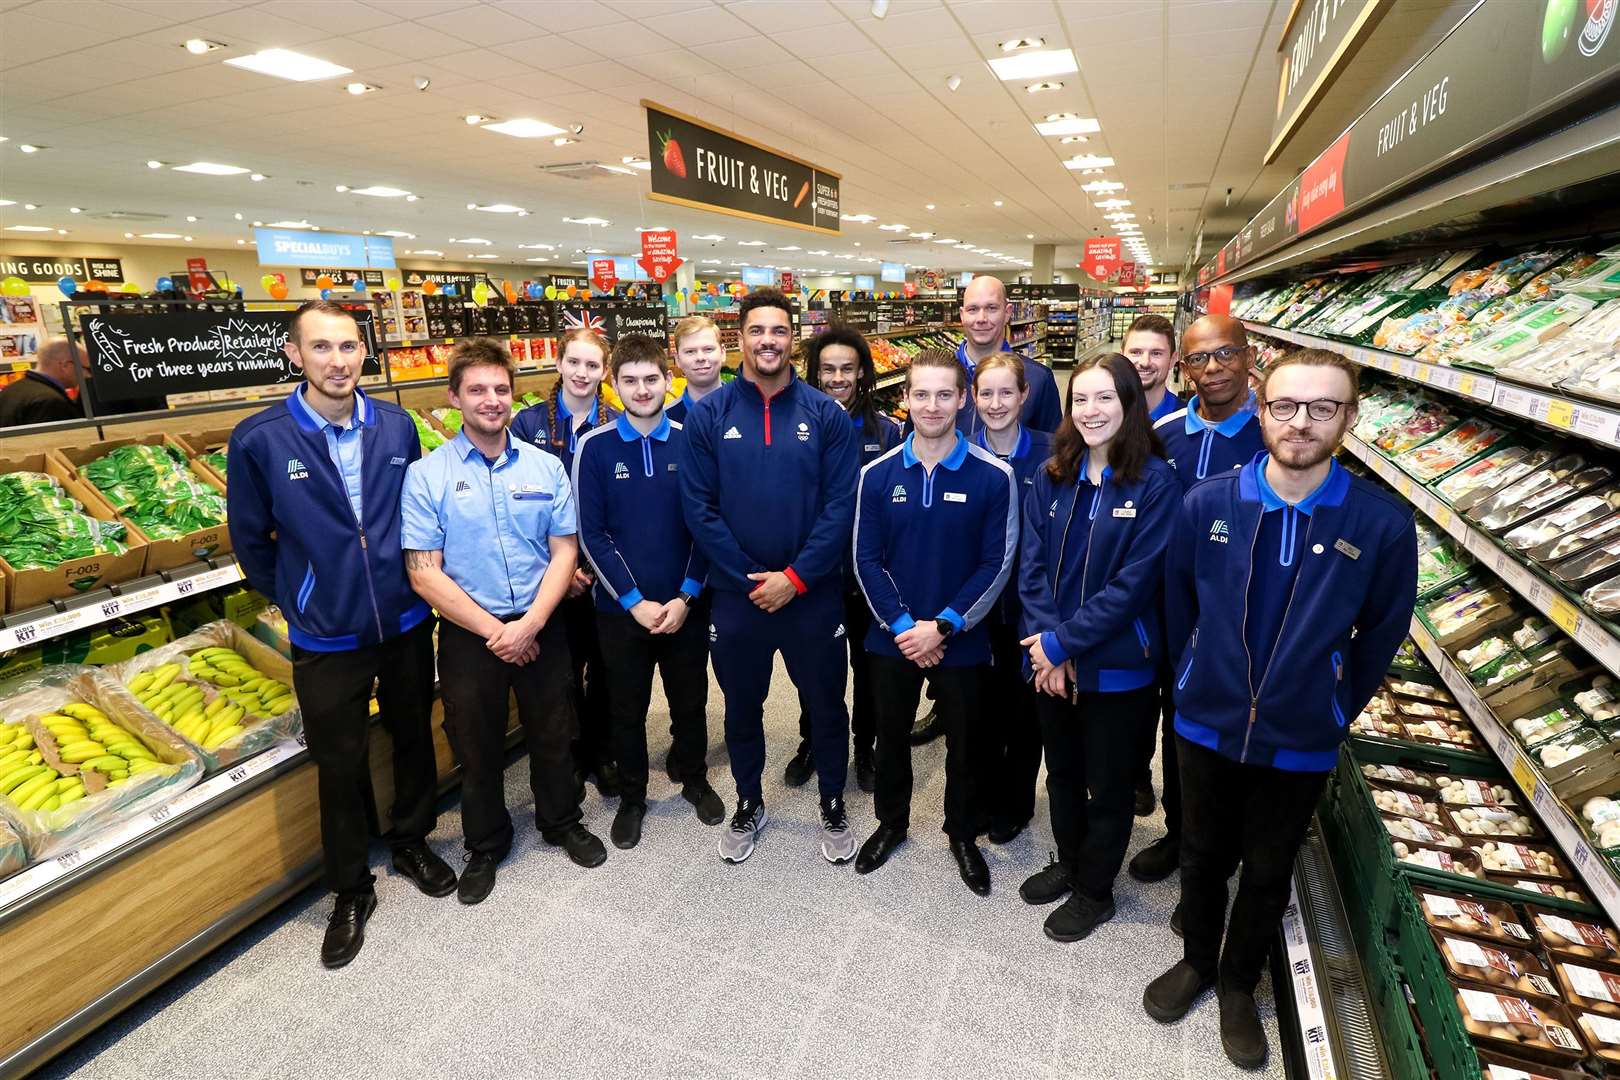 Matt Cook store manager, with Anthony Ogogo (centre) and Aldi Tunbridge Wells team in the fresh fruit and veg aisle